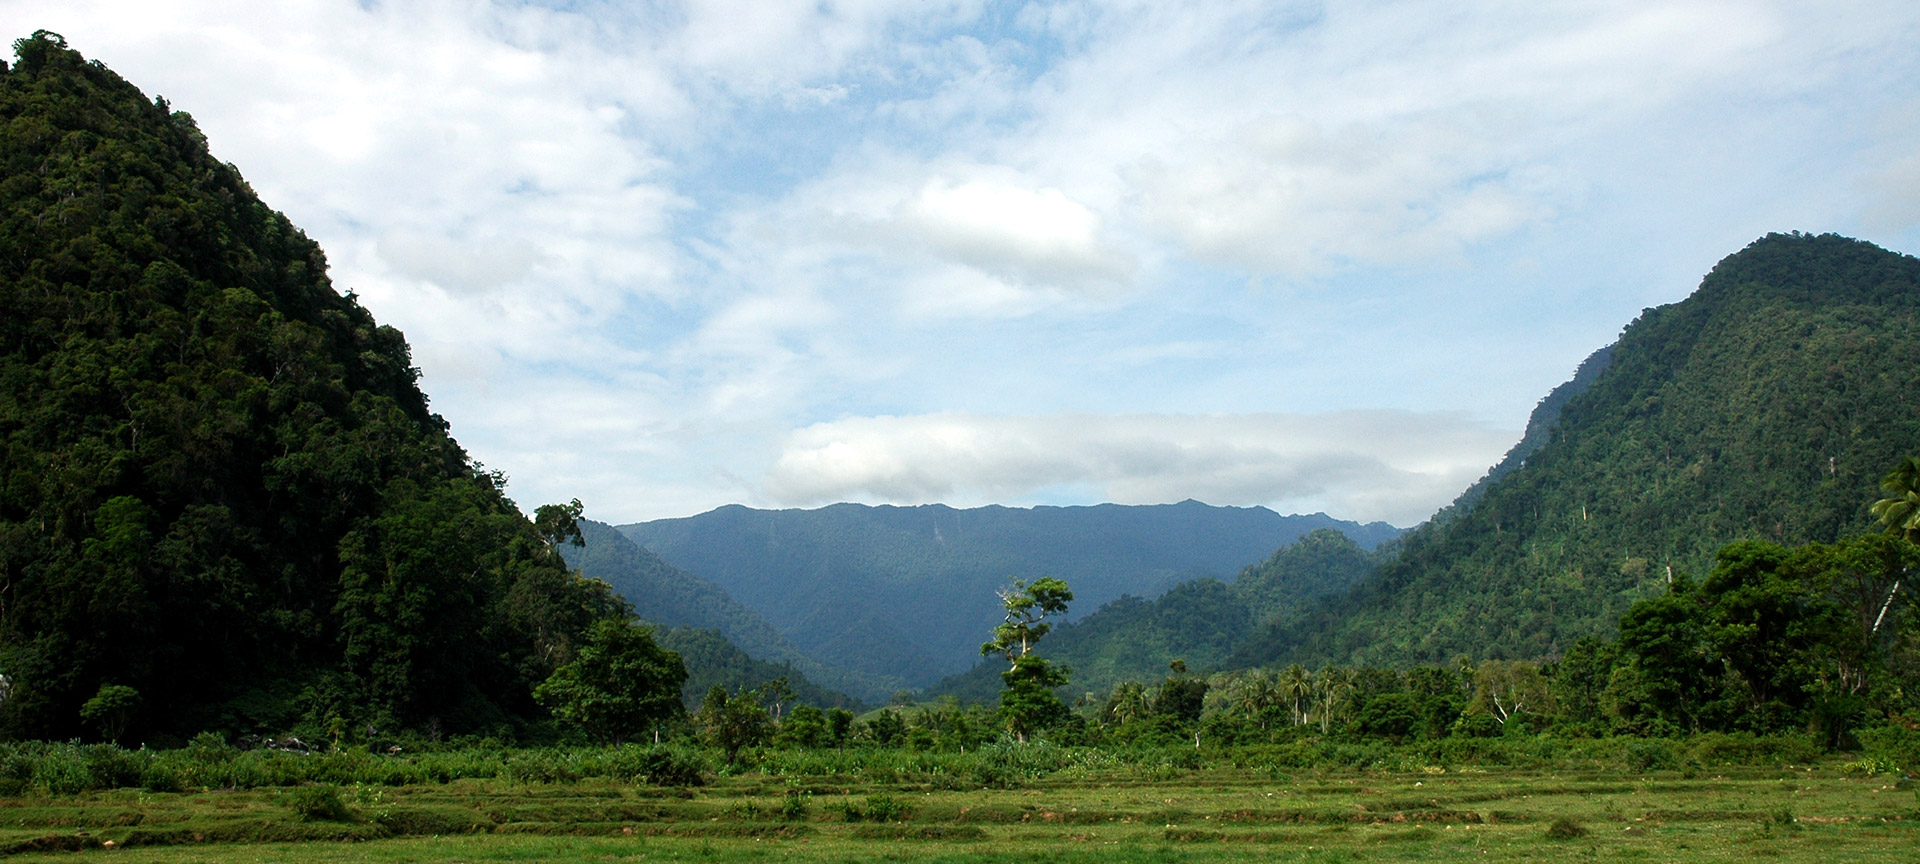 A Lush green area with mountains and hills surrounding. 